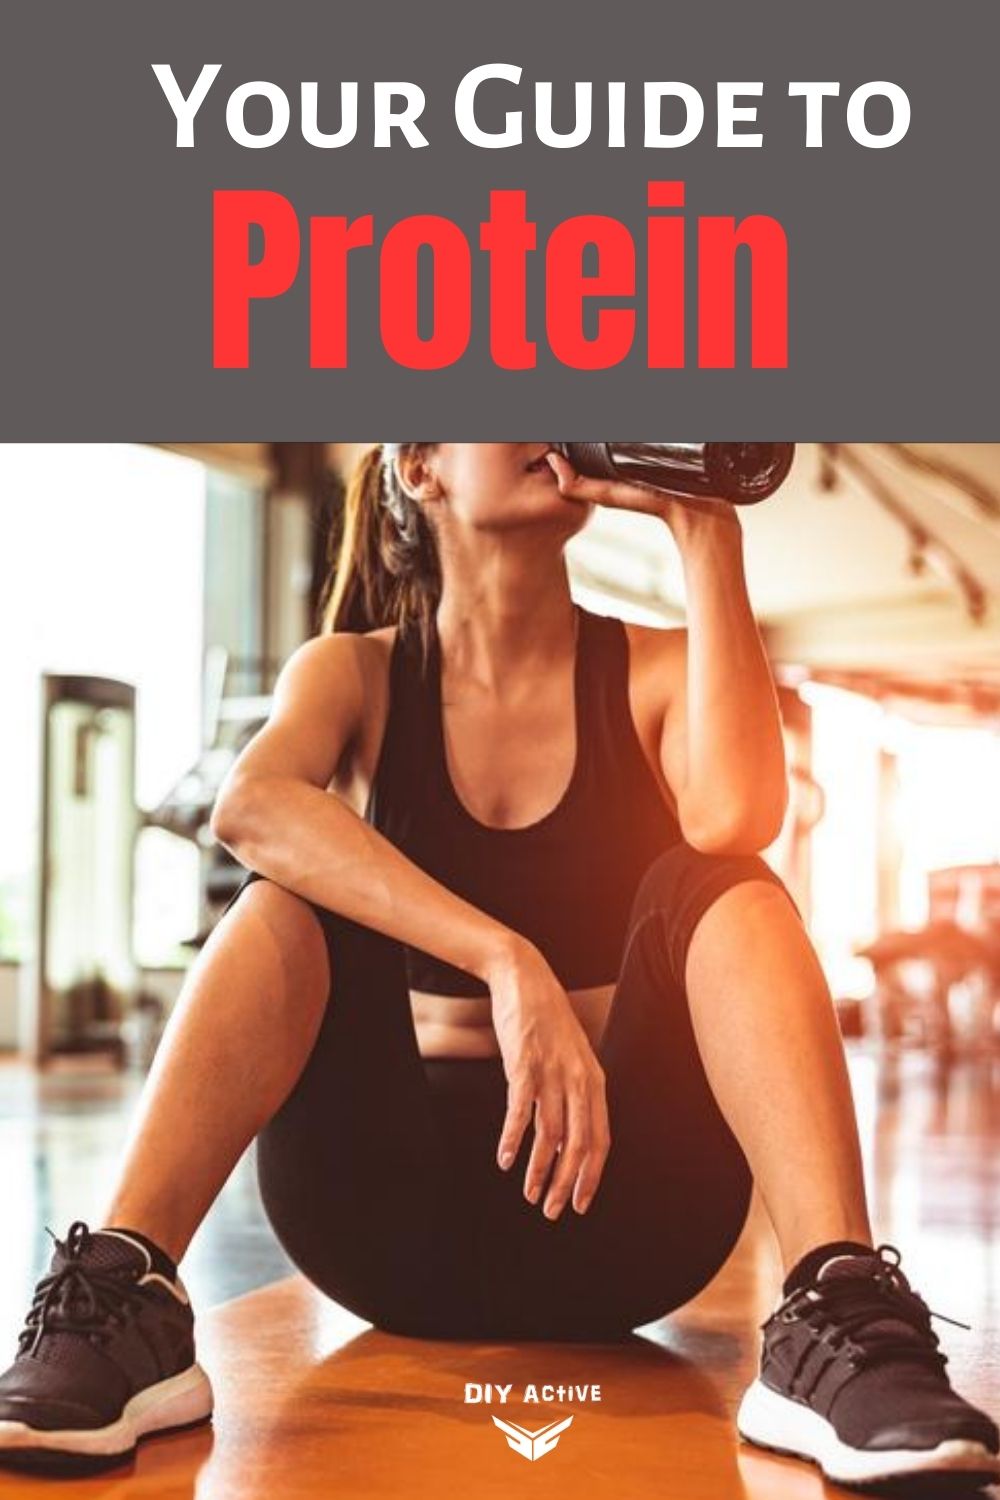 Your Guide to Protein: Be Picky With Your Protein